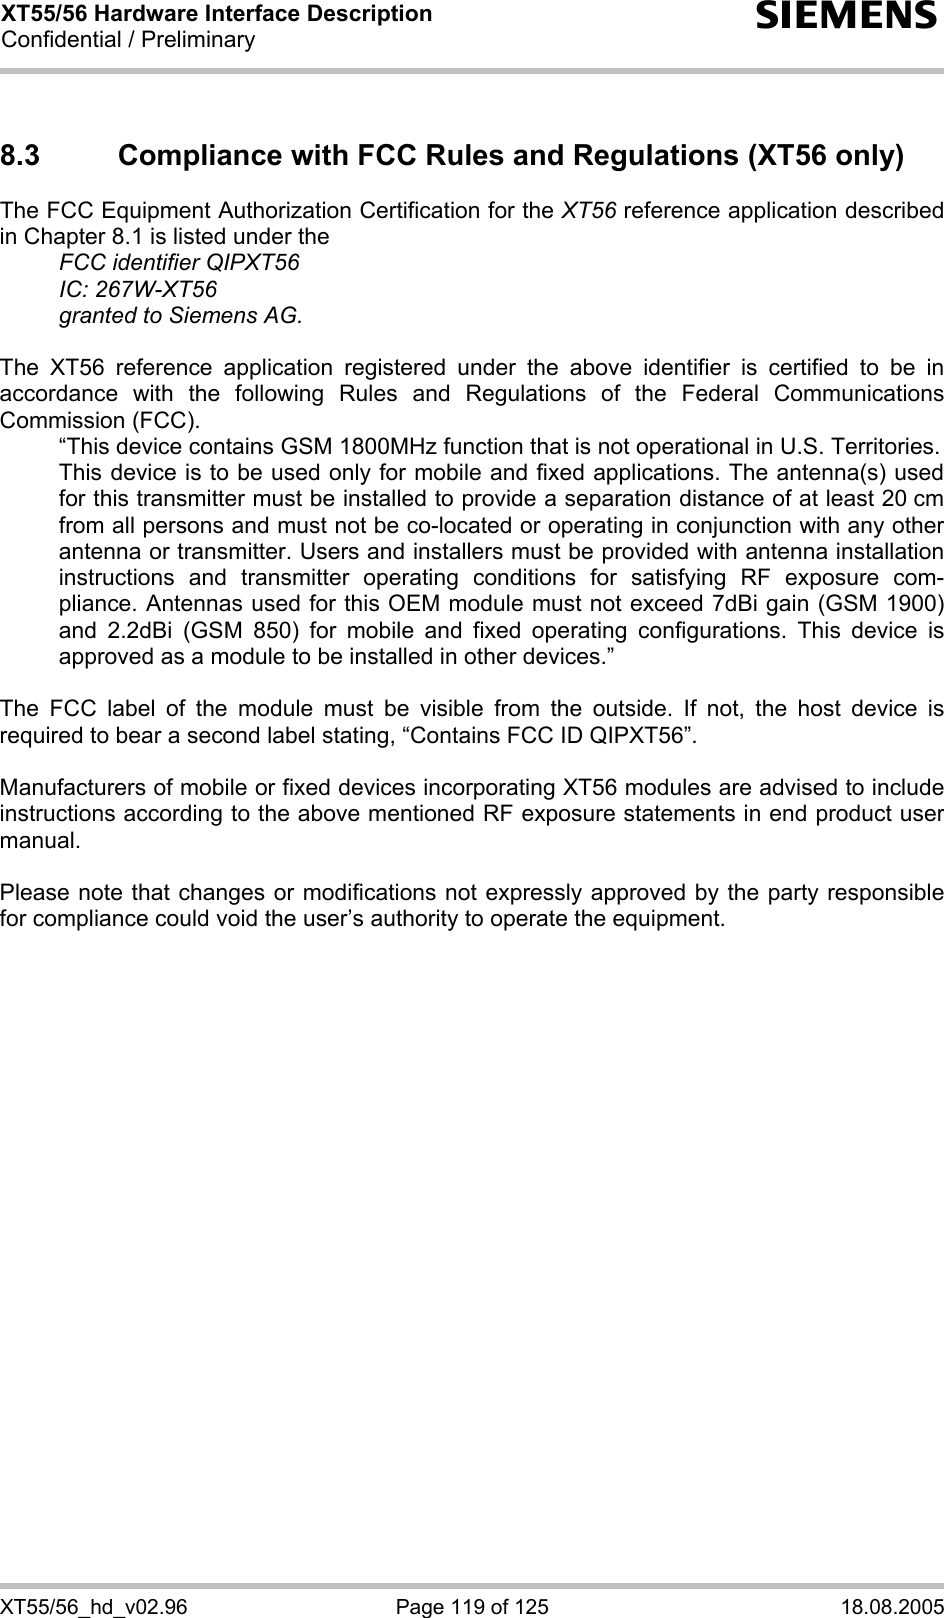 XT55/56 Hardware Interface Description Confidential / Preliminary s XT55/56_hd_v02.96  Page 119 of 125  18.08.2005 8.3  Compliance with FCC Rules and Regulations (XT56 only) The FCC Equipment Authorization Certification for the XT56 reference application described in Chapter 8.1 is listed under the   FCC identifier QIPXT56  IC: 267W-XT56   granted to Siemens AG.   The XT56 reference application registered under the above identifier is certified to be in accordance with the following Rules and Regulations of the Federal Communications Commission (FCC).    “This device contains GSM 1800MHz function that is not operational in U.S. Territories.    This device is to be used only for mobile and fixed applications. The antenna(s) used for this transmitter must be installed to provide a separation distance of at least 20 cm from all persons and must not be co-located or operating in conjunction with any other antenna or transmitter. Users and installers must be provided with antenna installation instructions and transmitter operating conditions for satisfying RF exposure com-pliance. Antennas used for this OEM module must not exceed 7dBi gain (GSM 1900) and 2.2dBi (GSM 850) for mobile and fixed operating configurations. This device is approved as a module to be installed in other devices.”  The FCC label of the module must be visible from the outside. If not, the host device is required to bear a second label stating, “Contains FCC ID QIPXT56”.  Manufacturers of mobile or fixed devices incorporating XT56 modules are advised to include instructions according to the above mentioned RF exposure statements in end product user manual.  Please note that changes or modifications not expressly approved by the party responsible for compliance could void the user’s authority to operate the equipment.  